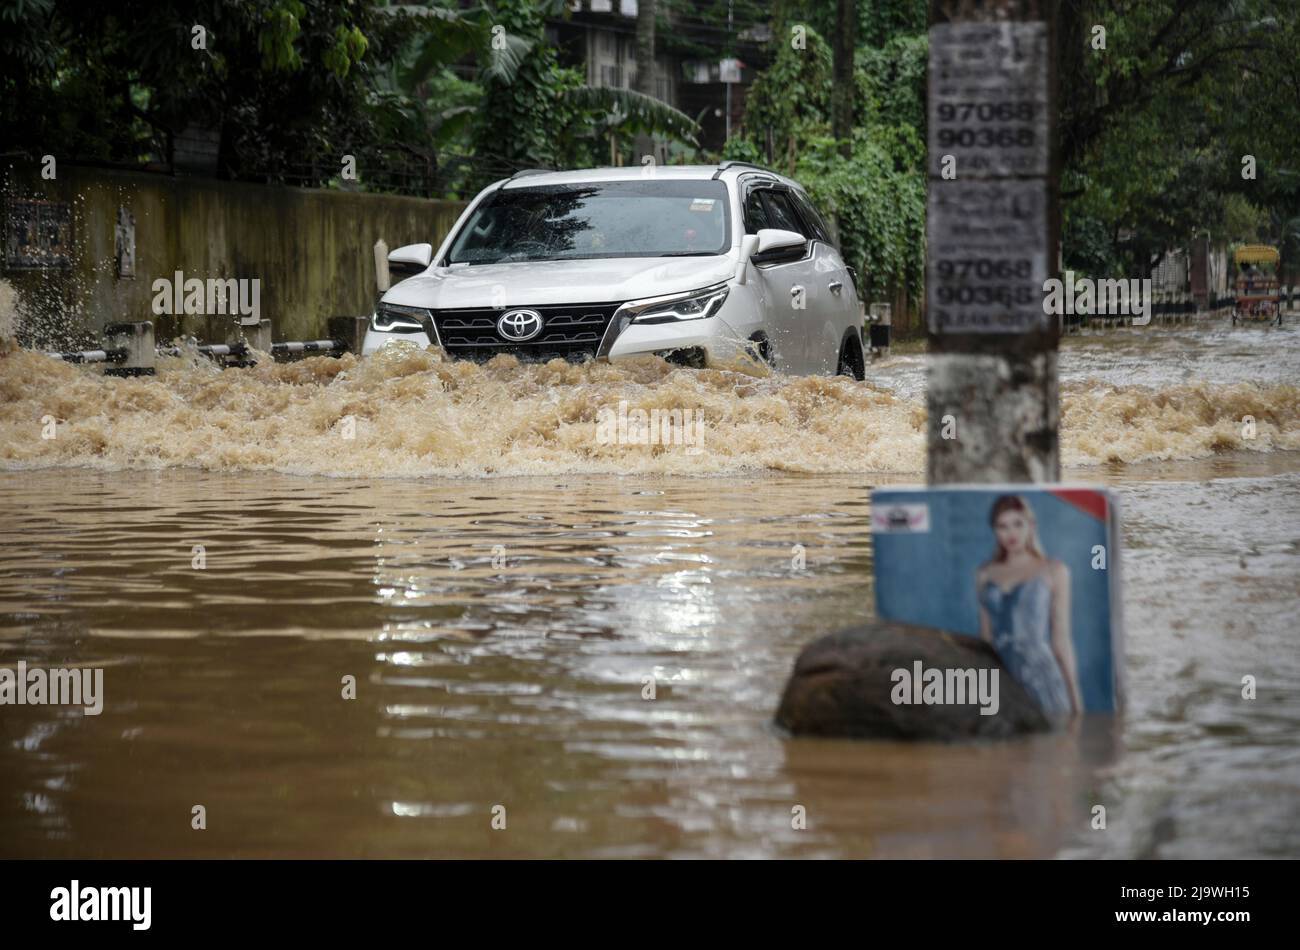 Guwahati, Assam, India. 25th May, 2022. A car wades across a flooded street after heavy rains, in Guwahati, Assam, India on 25 May 2022. Waterlogging is a common scene in Guwahati city due to poor drainage system. Credit: David Talukdar/Alamy Live News Stock Photo